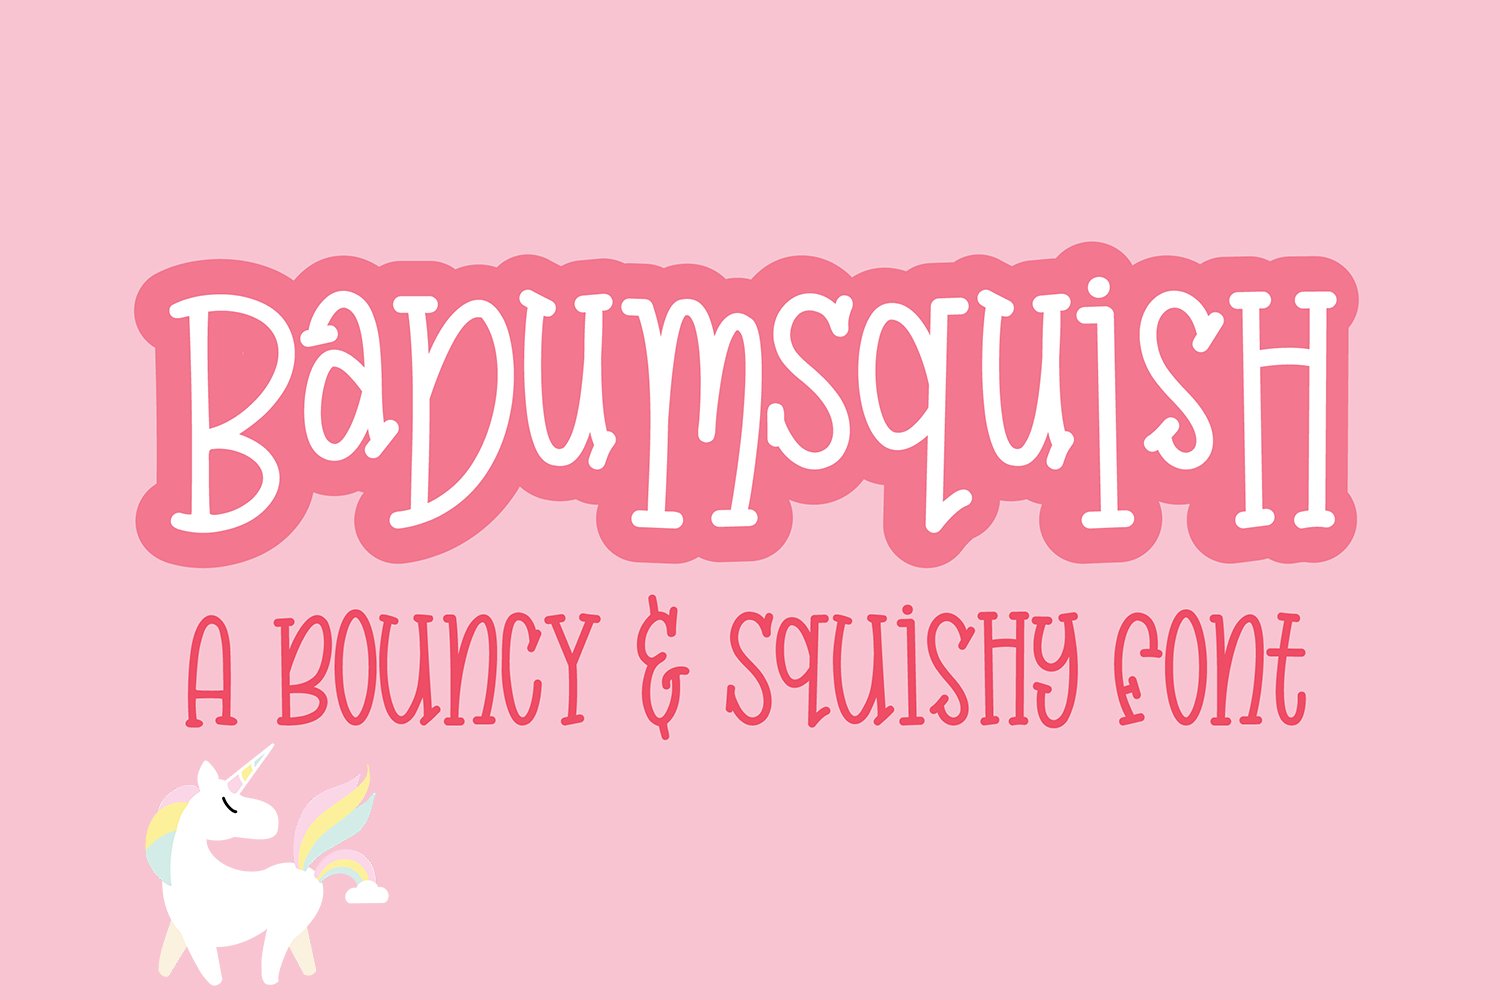 Badumsquish - a bouncy squishy font! cover image.